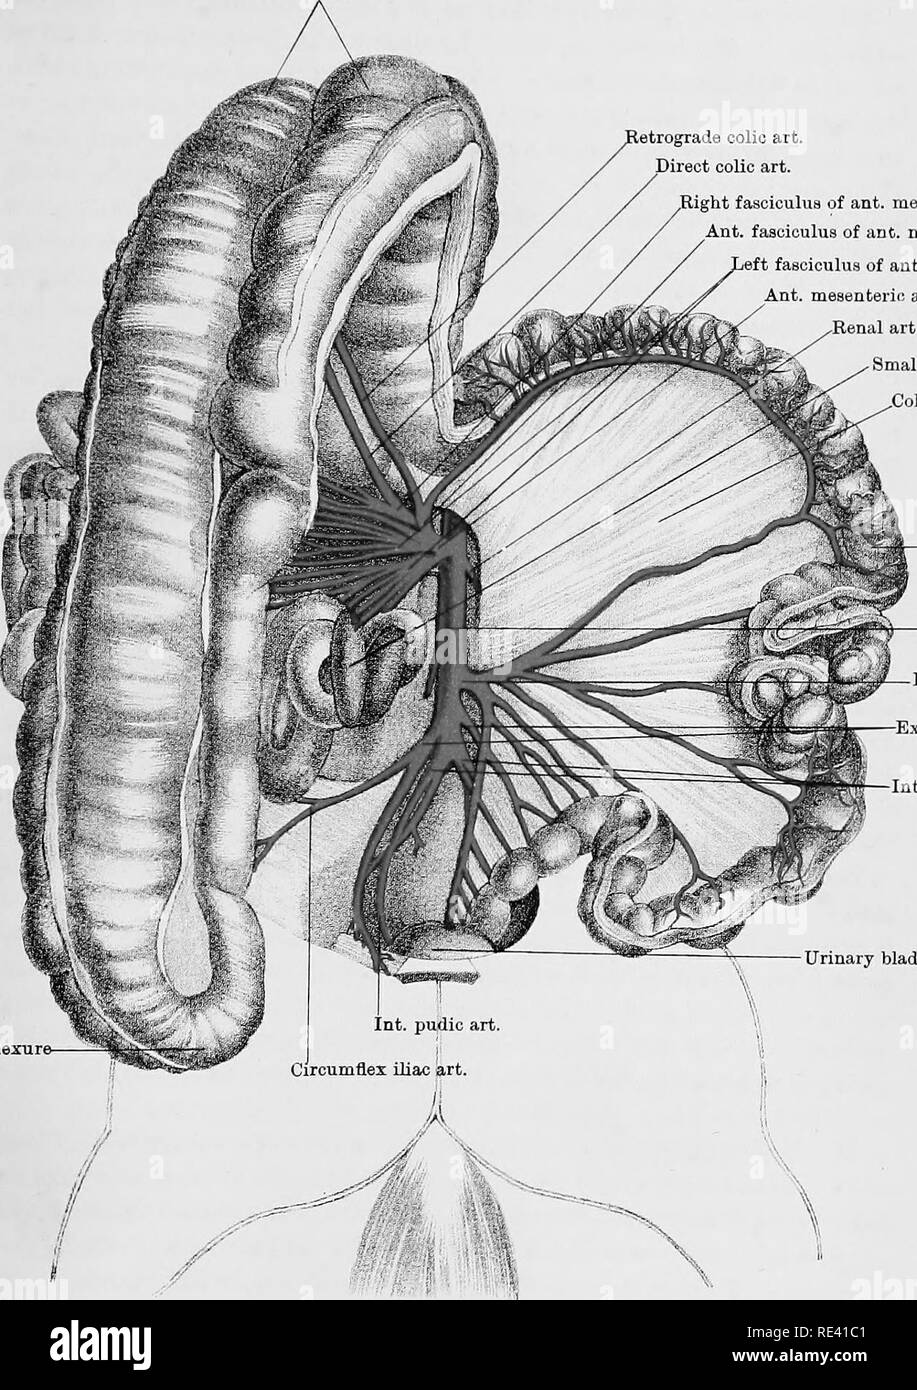 . The anatomy of the horse, a dissection guide. Horses. PLATE XL I I Double colon etrograde colic art. Diiect colic art. Right fasciculua of ant. mesenteric Ant. fasciculus of anc. mesenteric left fasciculus of ant. mesenteric Ant mesentein art -Renal art Small intestine ,Colit mesentery â Single colon. â Post, aorta Po=*t mesenteric artery Et iliac art. Int iliac art. Urinary bladder Prinied. lyW. tAK JoTiiwton, Eim'buTgh &amp; London J^'ESflNEa AM13 MJiiaJiiM'rJiKlCNARTERIES [Chauveau]. Please note that these images are extracted from scanned page images that may have been digitally enhance Stock Photo